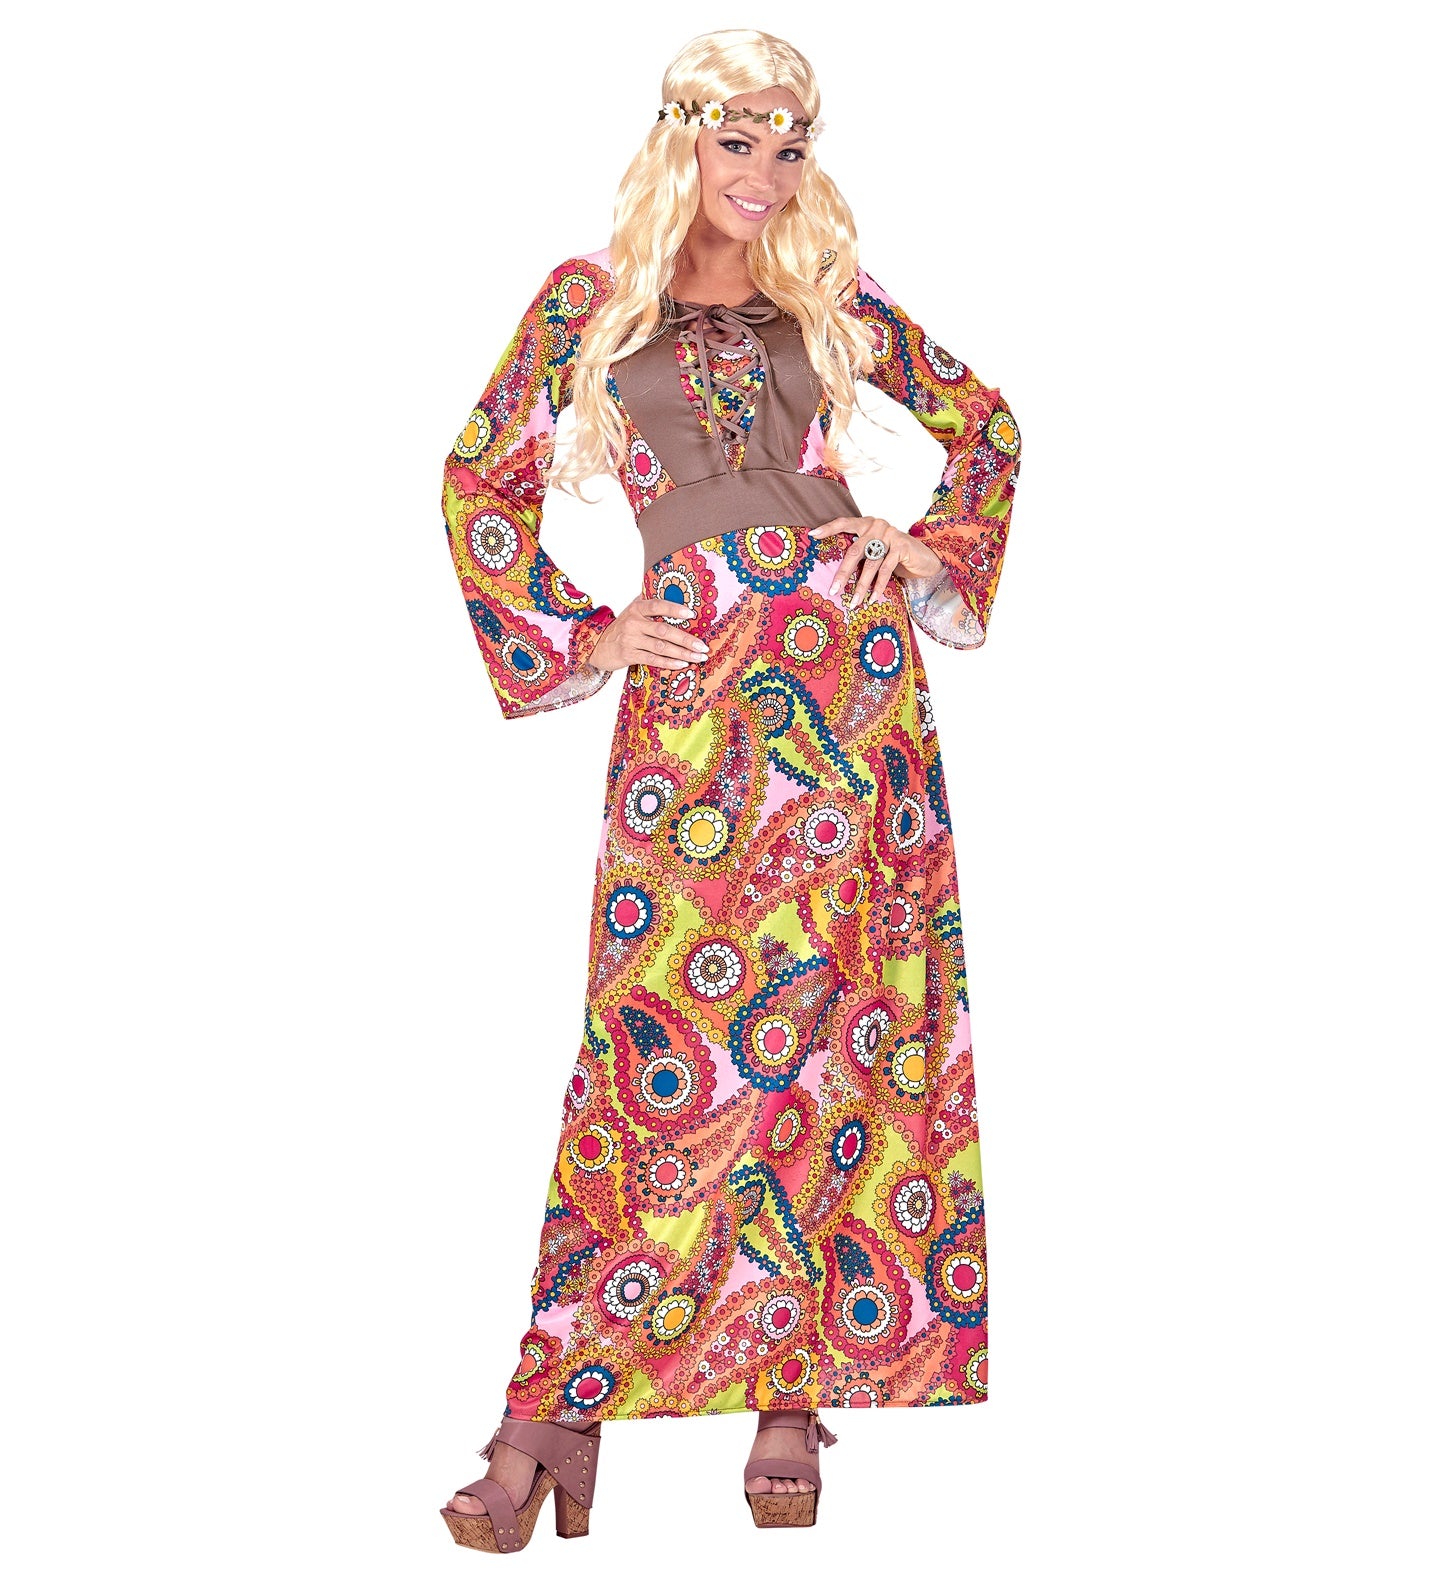 Hippie Costumes - Hippie Outfits for Adults & Kids